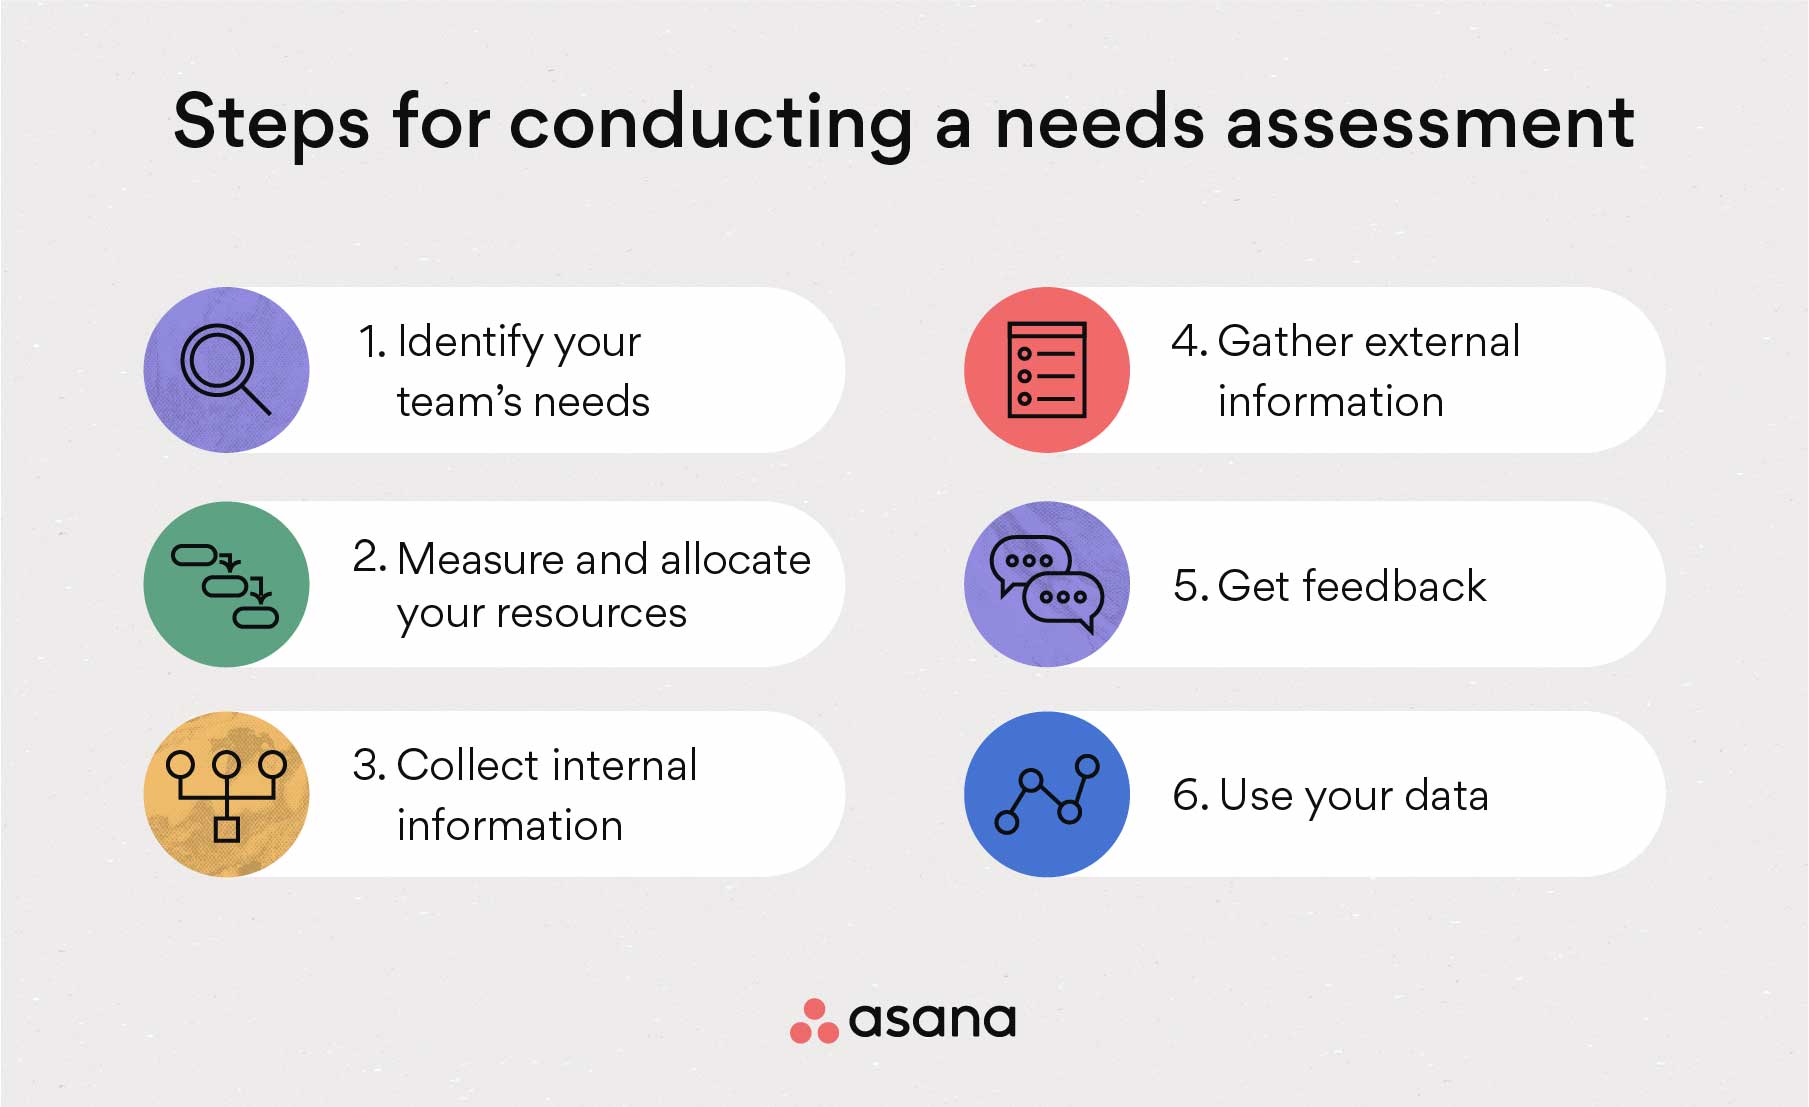 [inline illustration] Steps for conducting needs assessment (infographic)